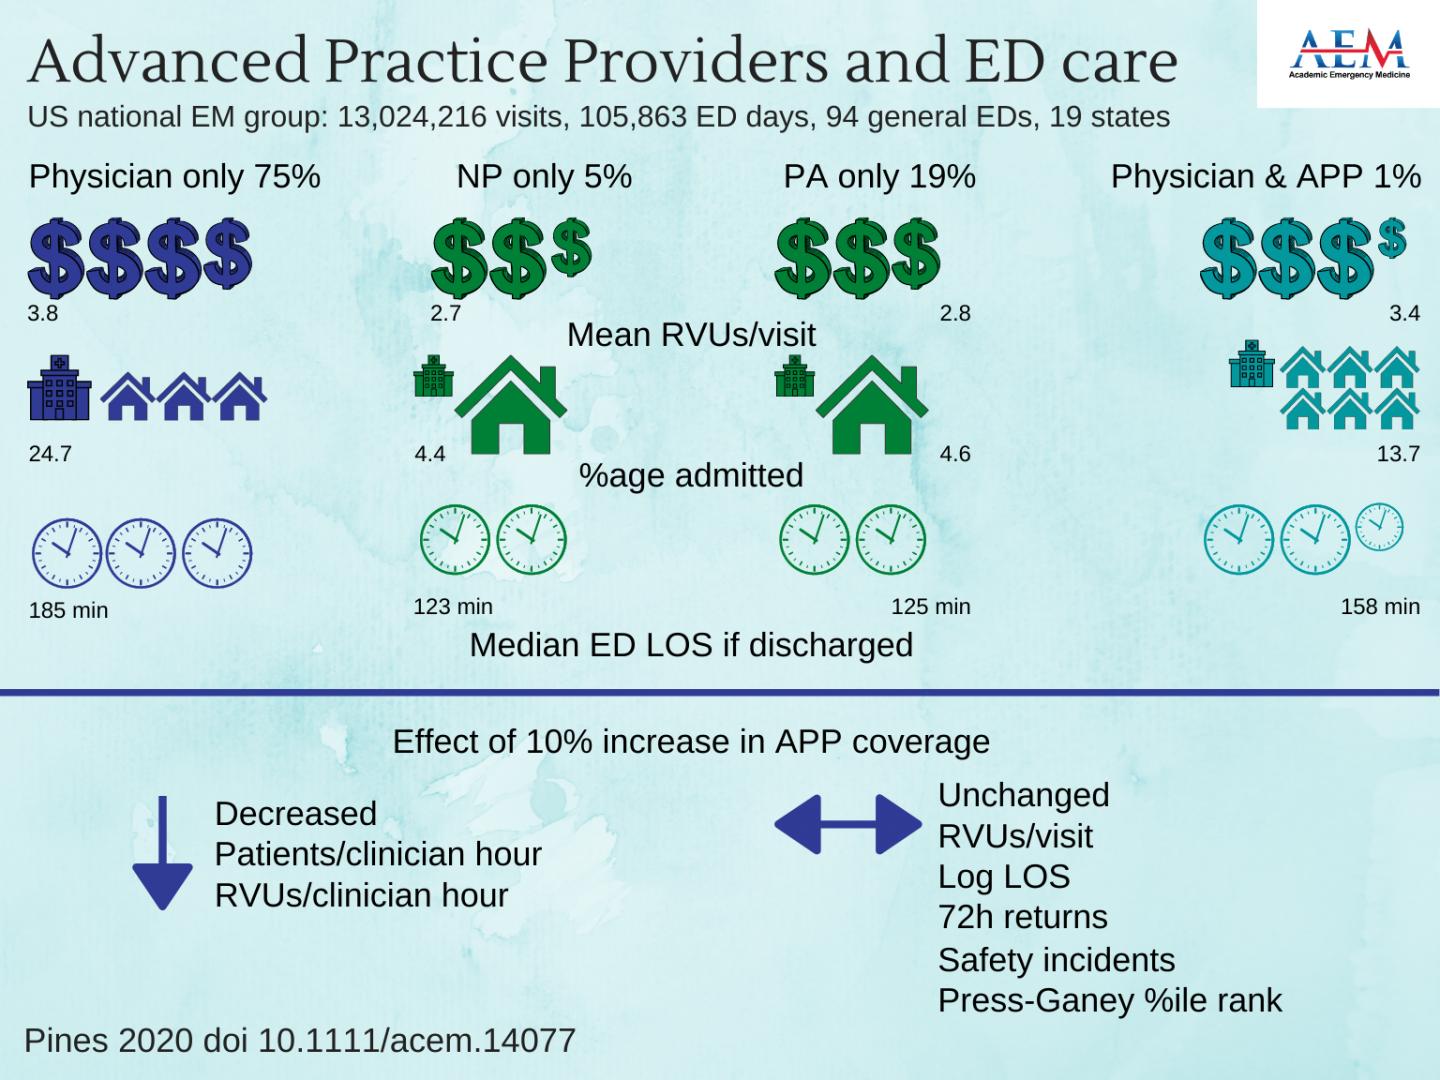 Advanced Practice Providers and Emergency Department Care